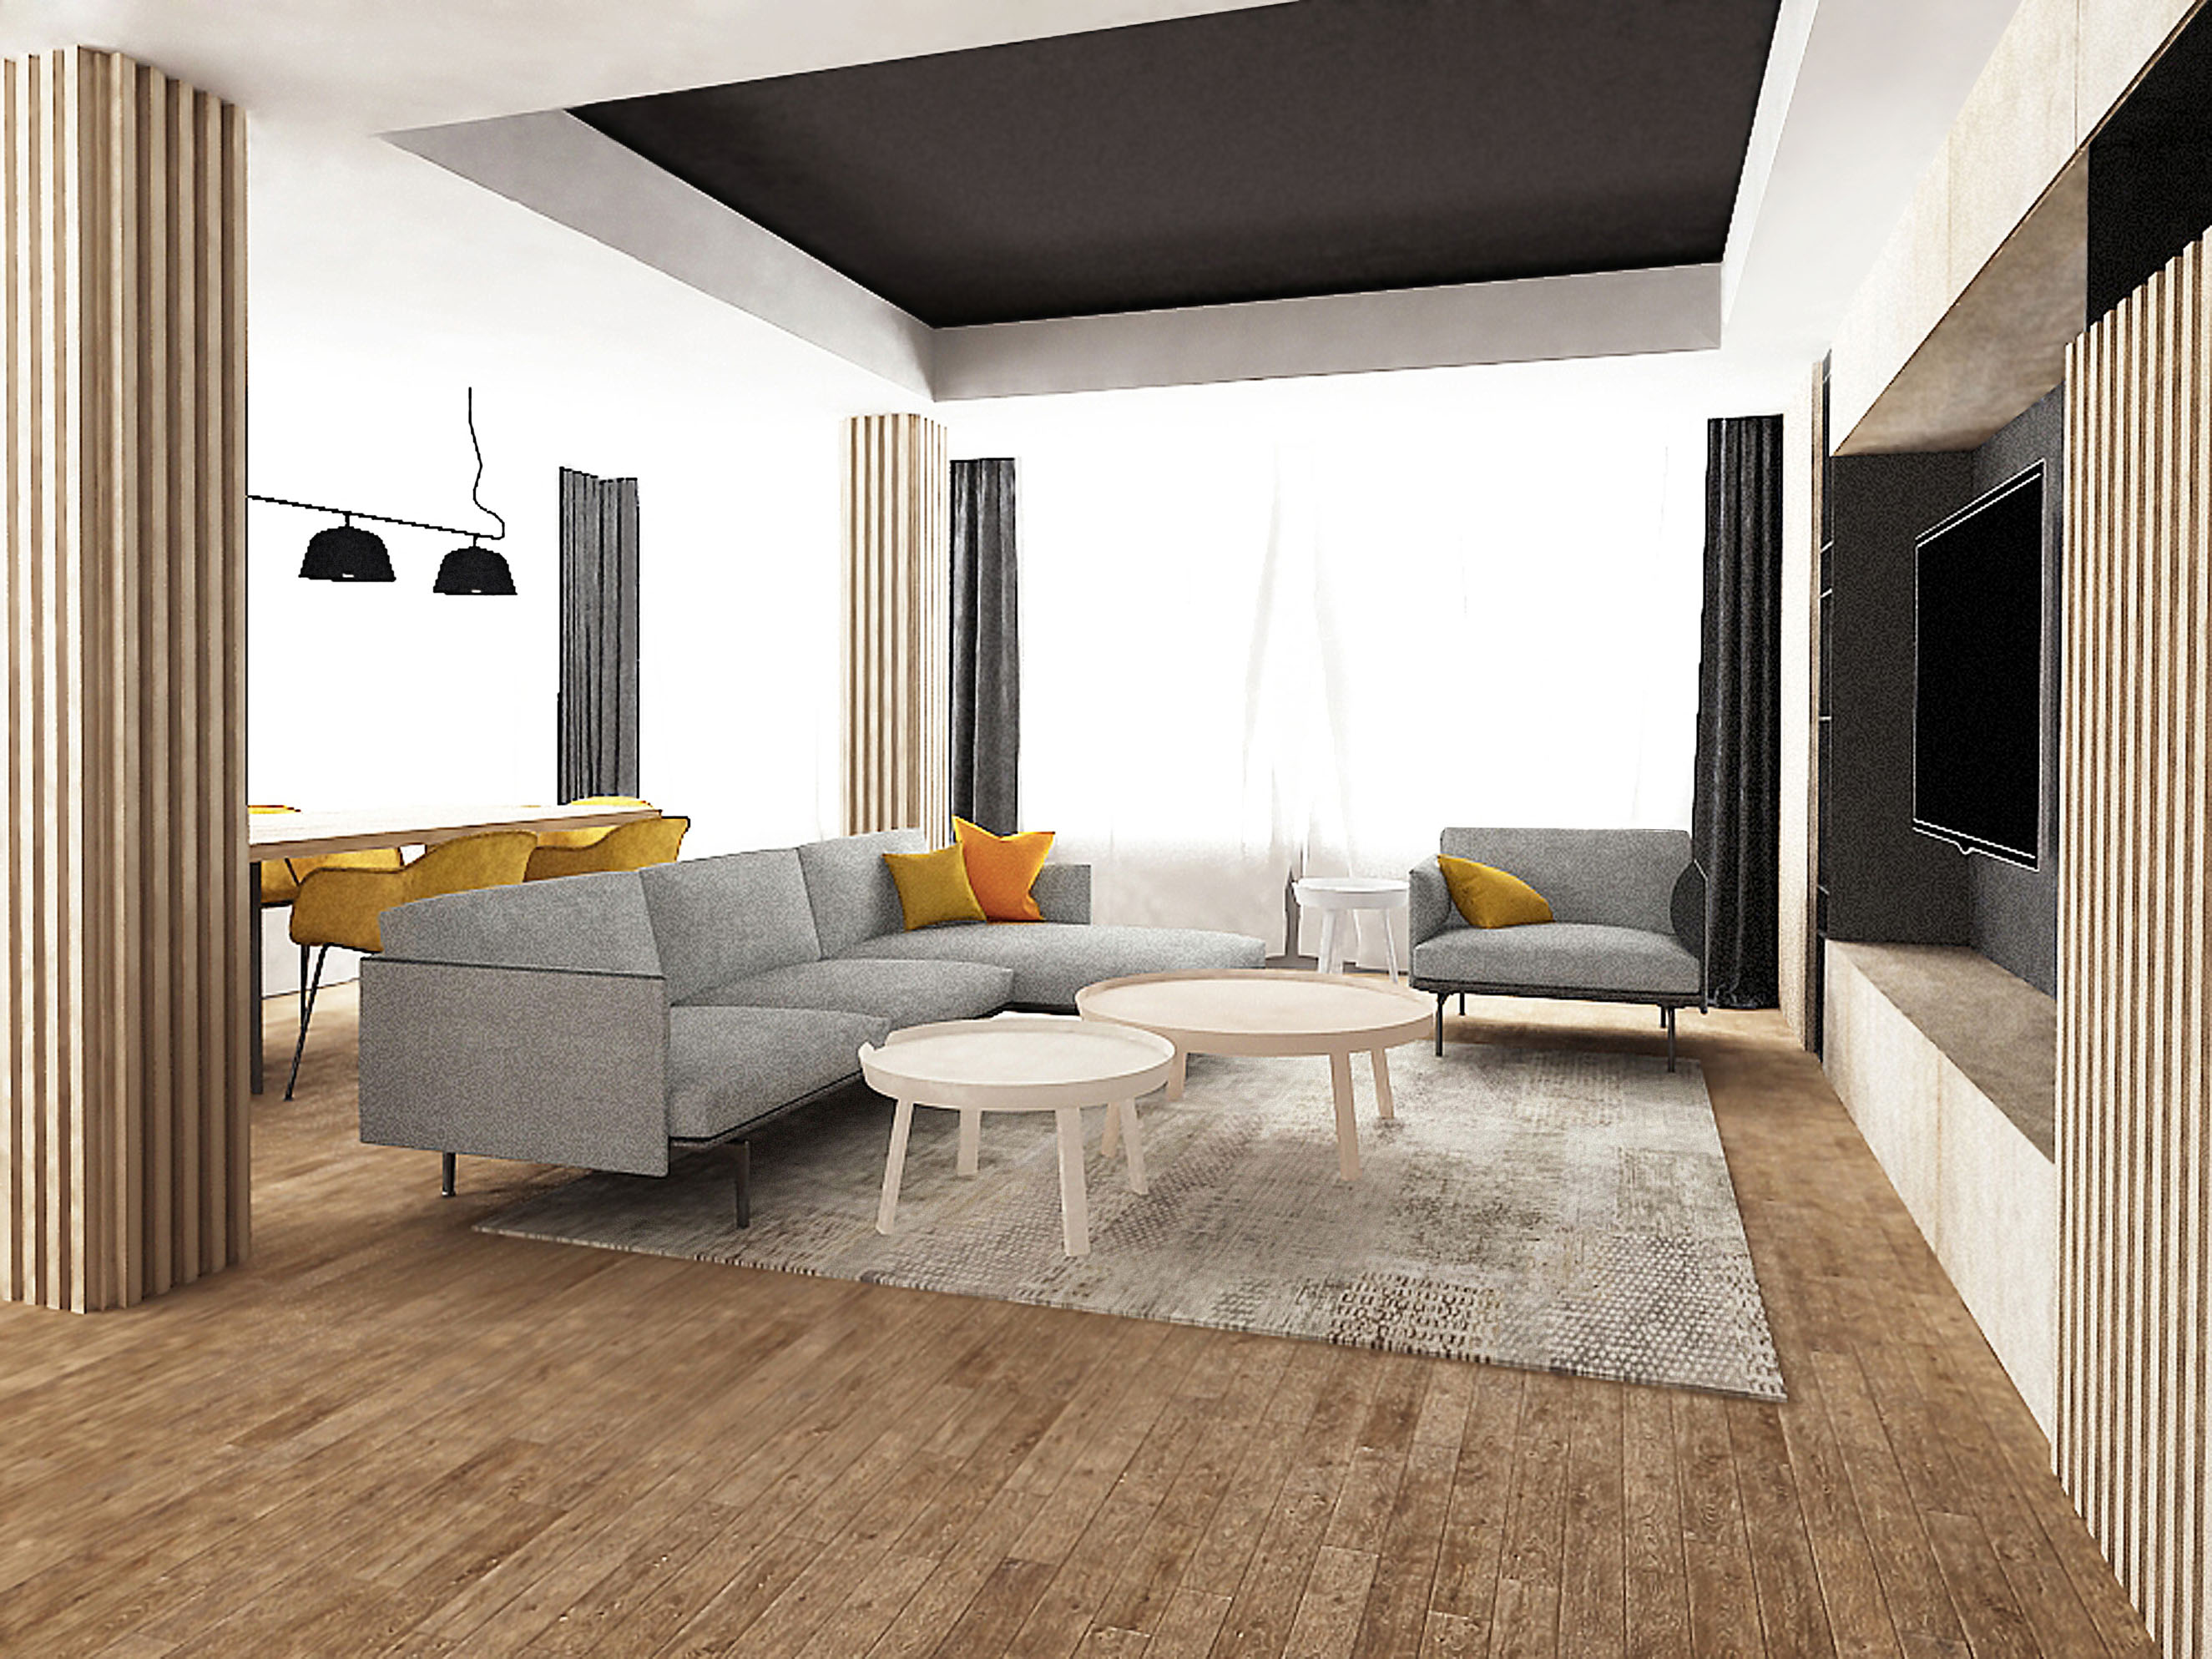 Scandinavian design living room with wooden floor, wood paneling and neutral grey furniture with yellow details